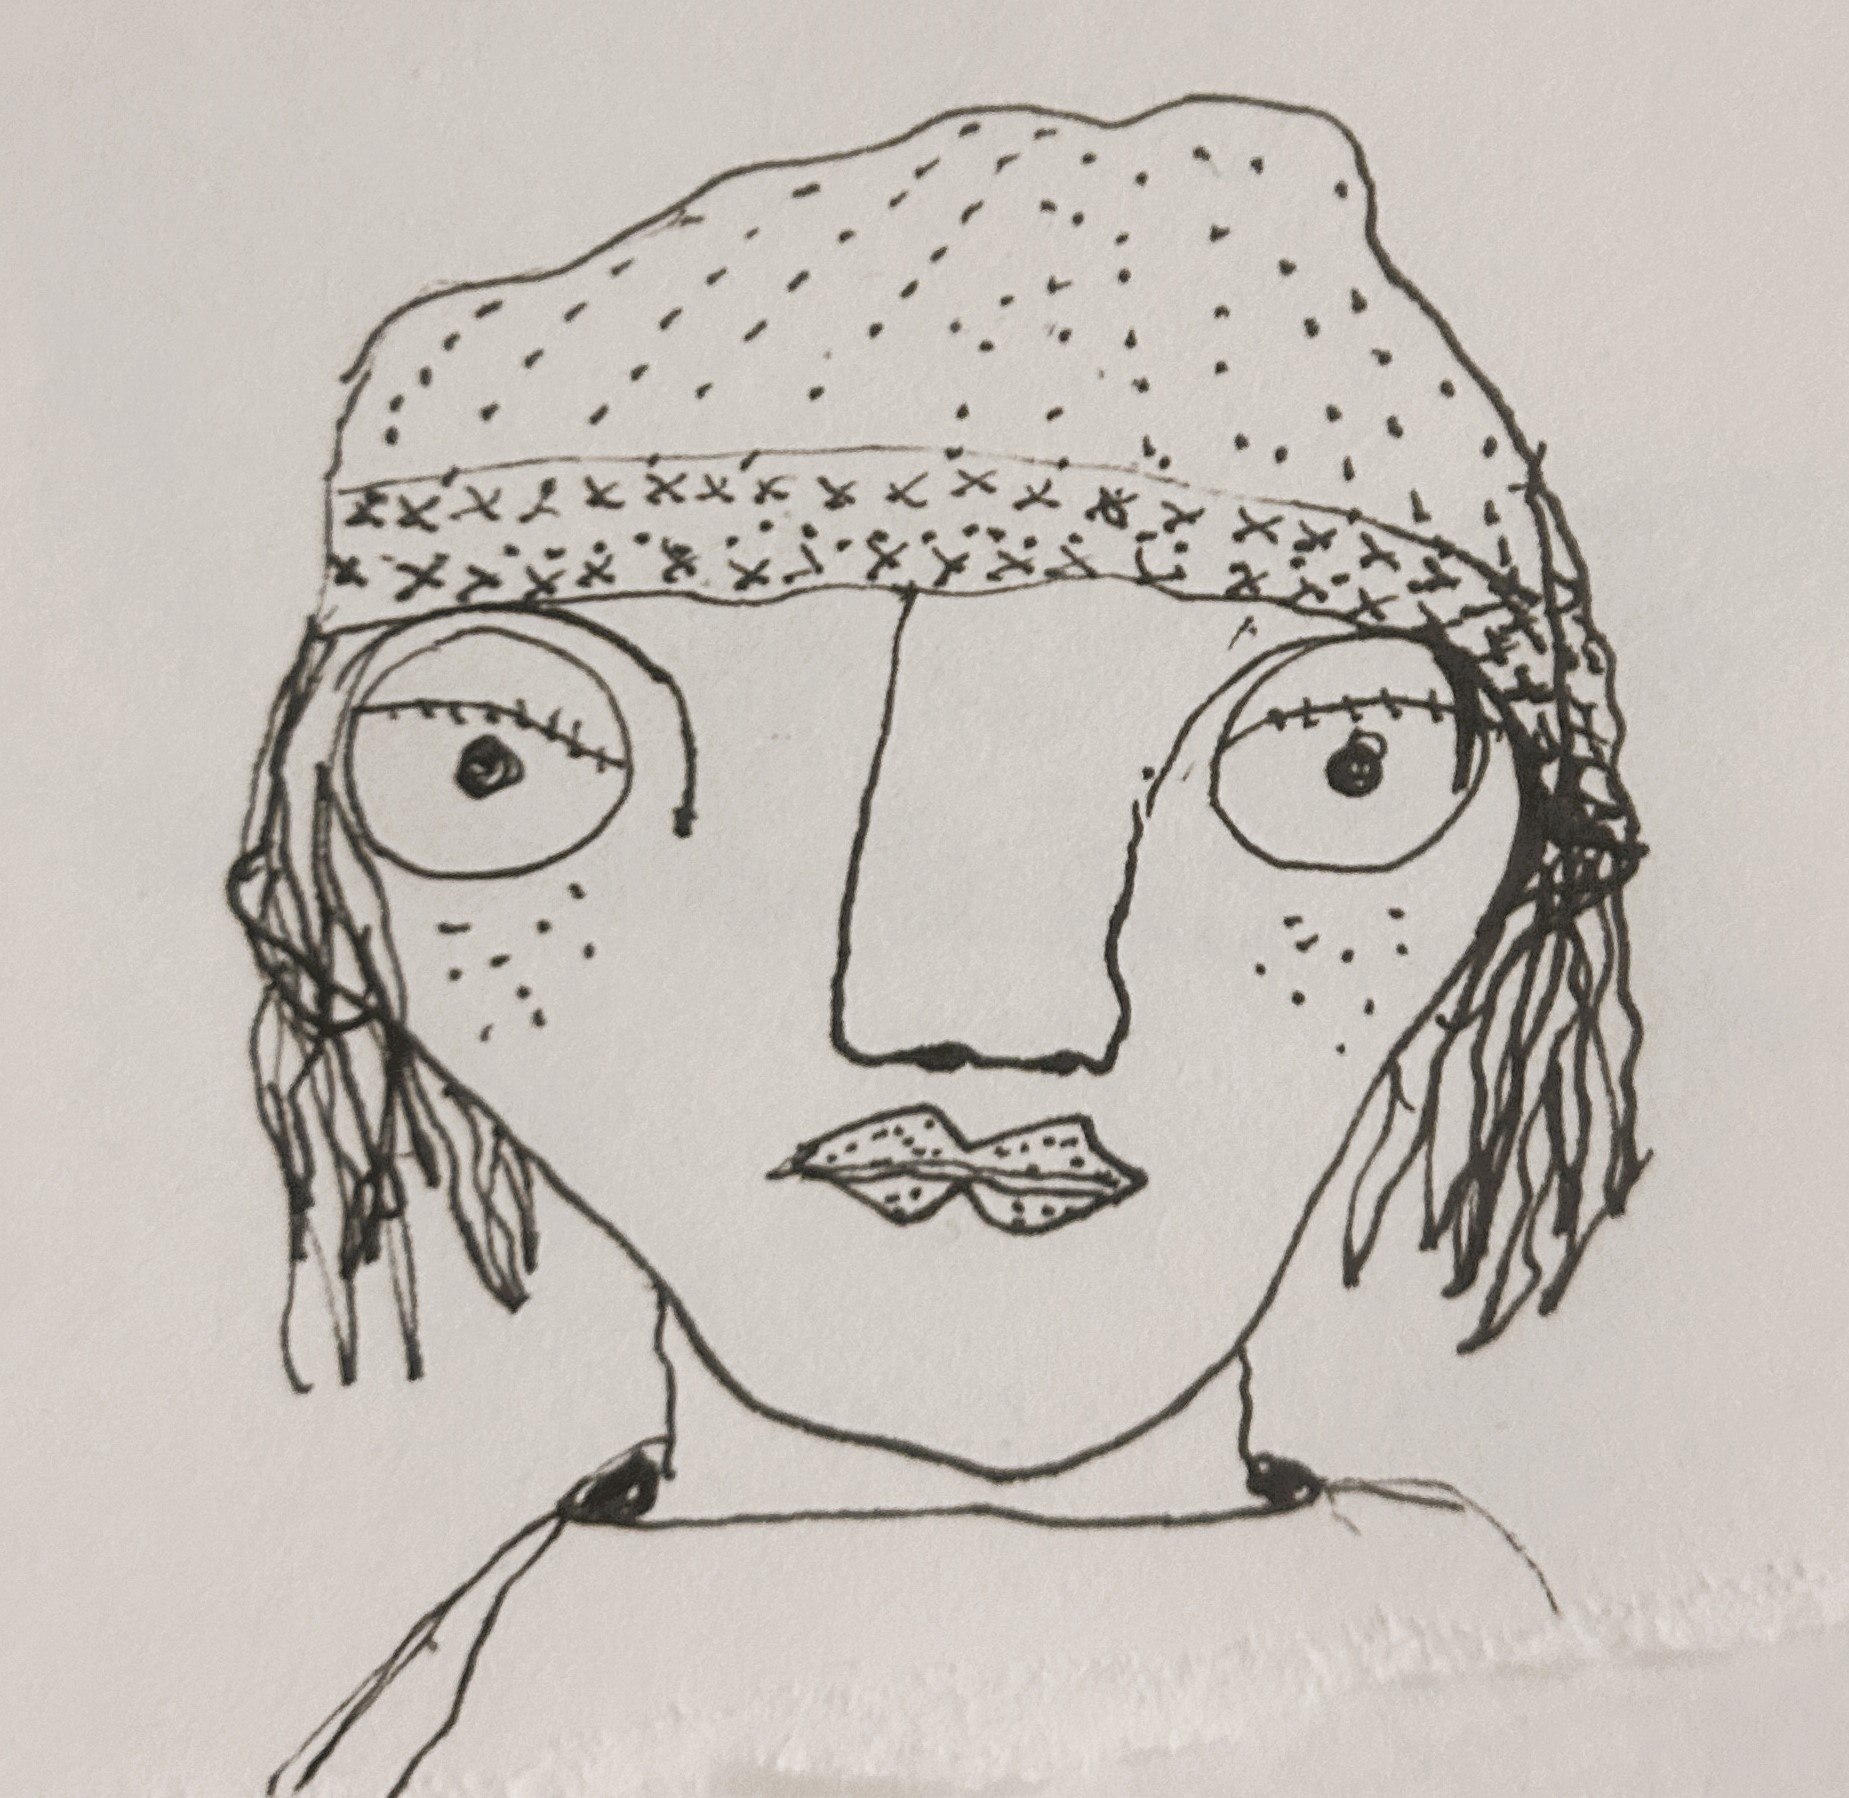 Pen drawing of person's head with beanie and shoulder length hair.